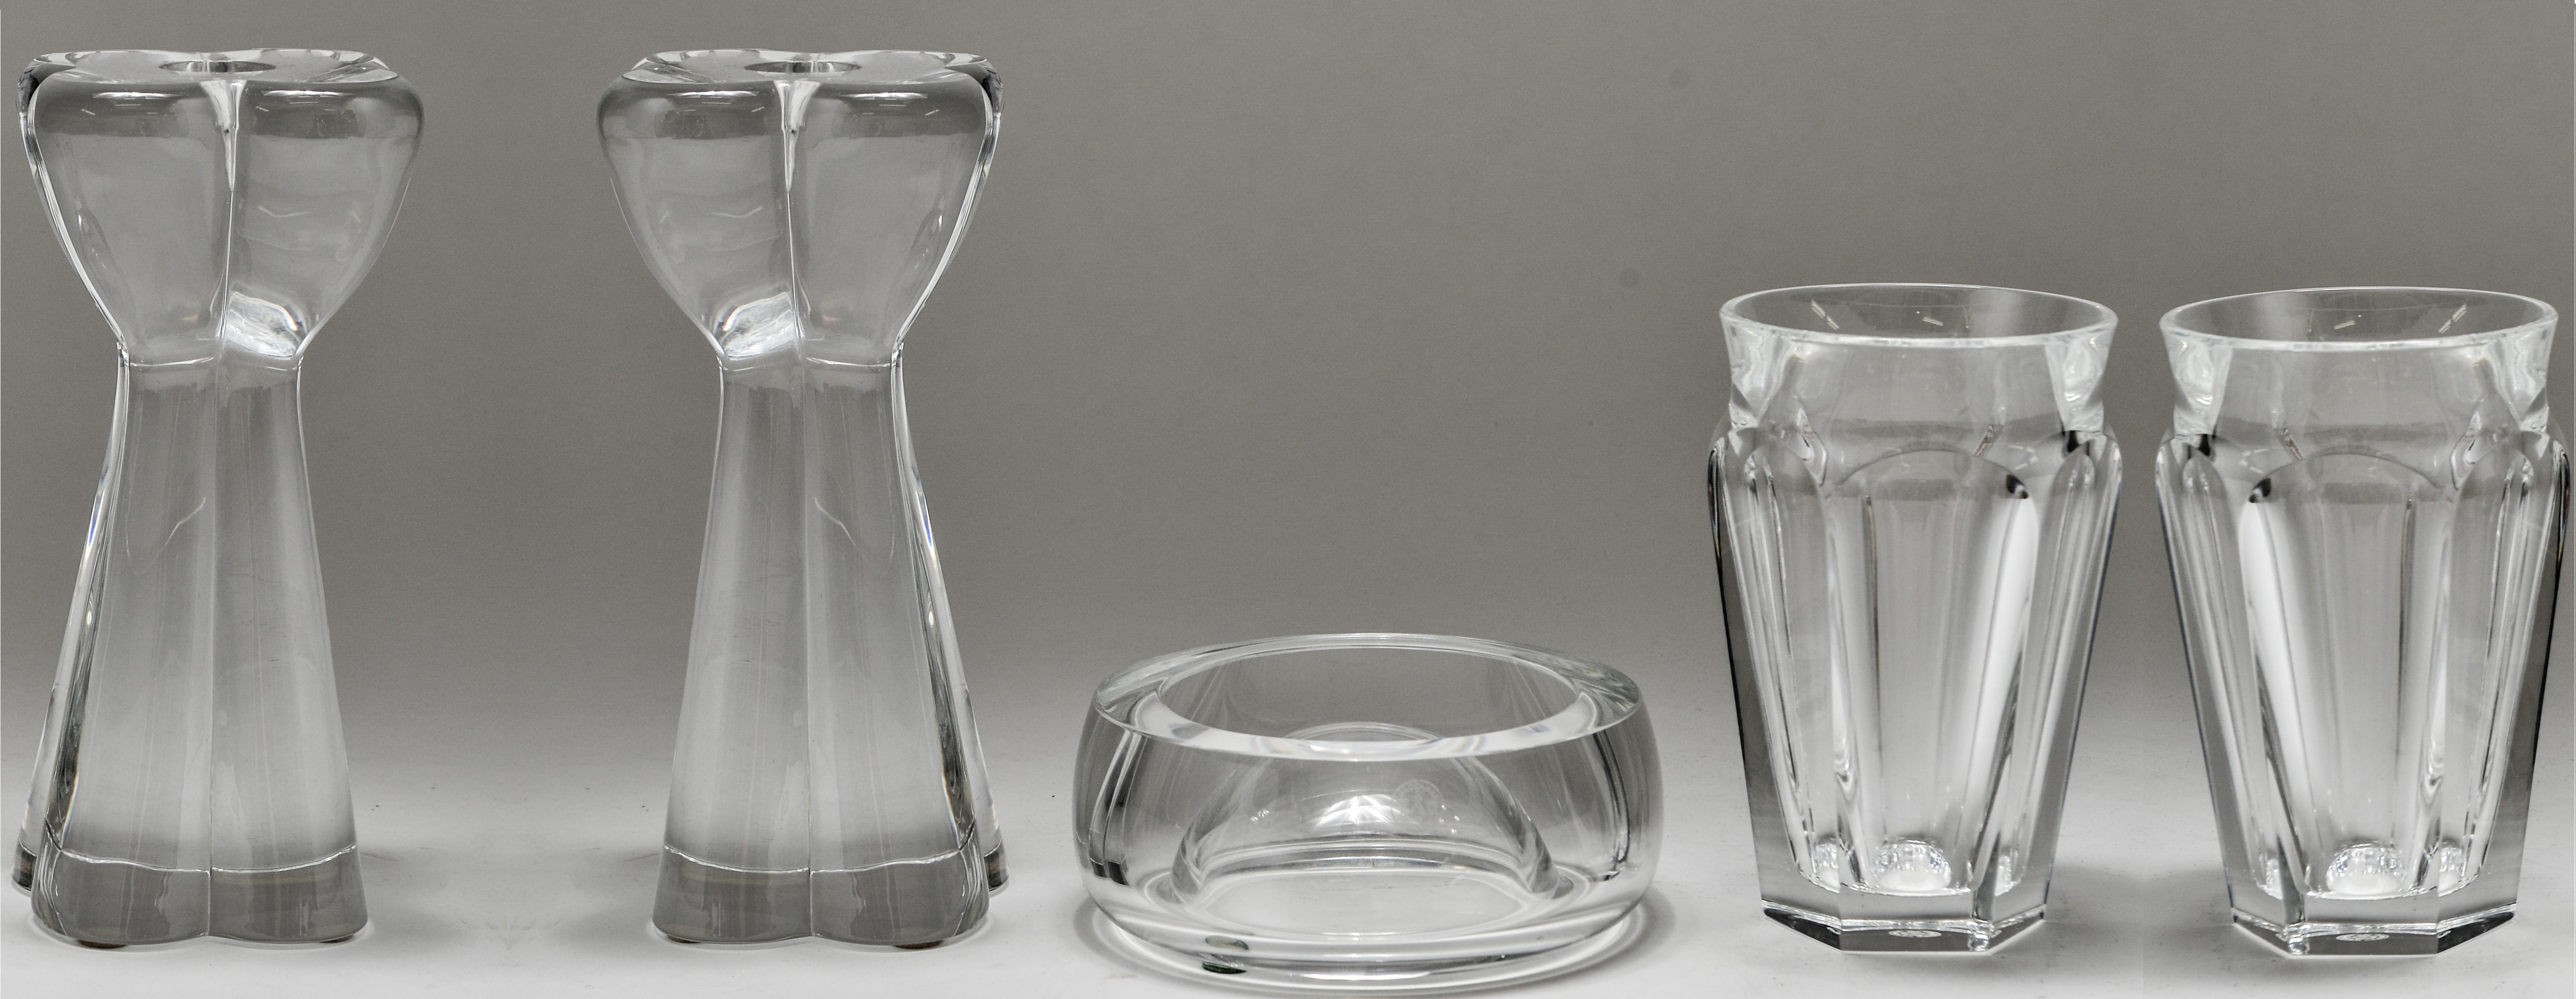 BACCARAT COLORLESS CRYSTAL VESSELS  3c3f2d